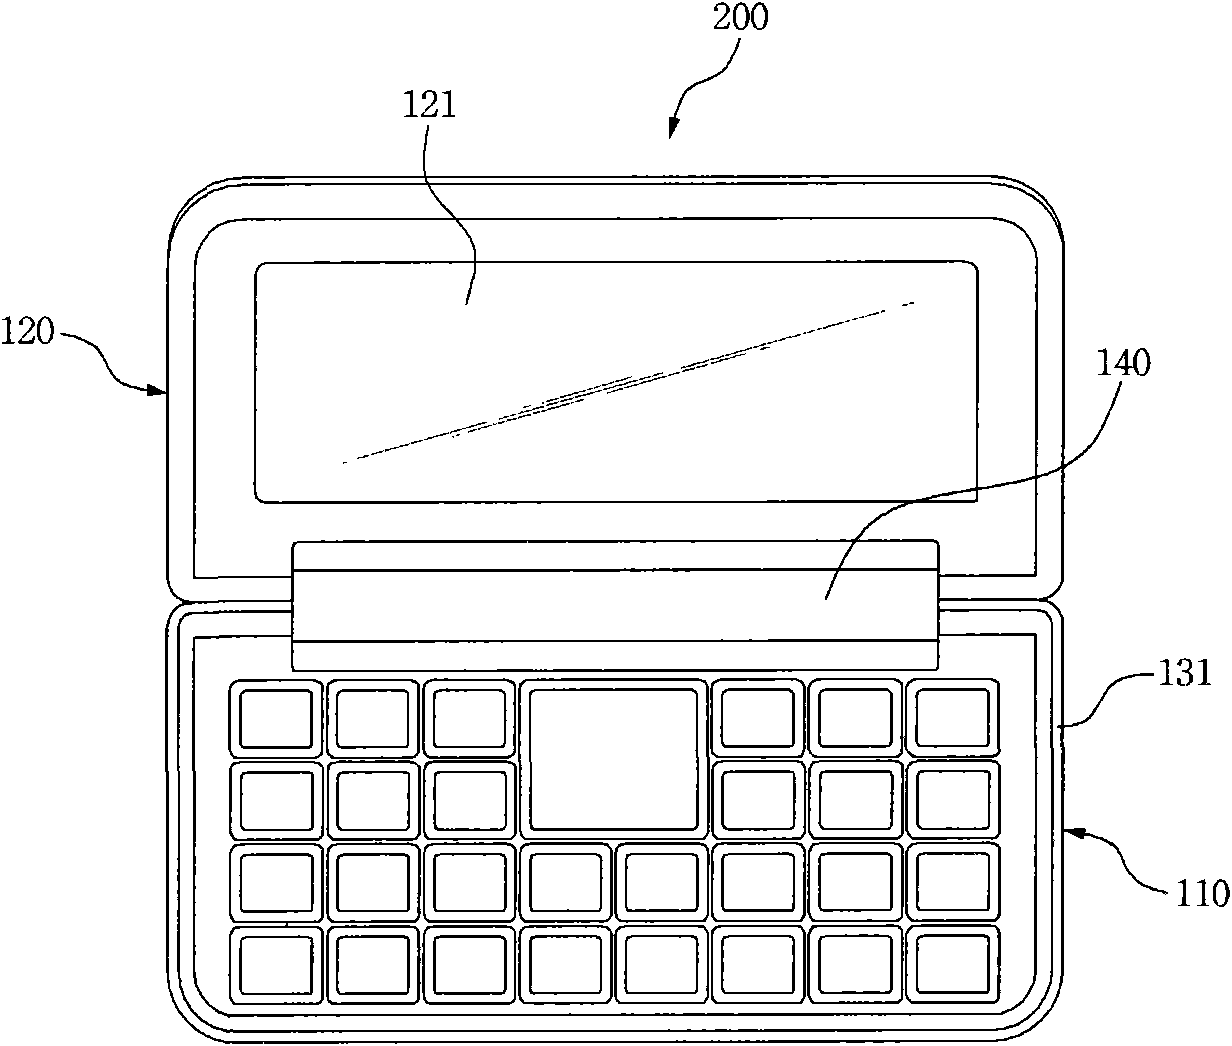 Portable electronic device integrated with silicone